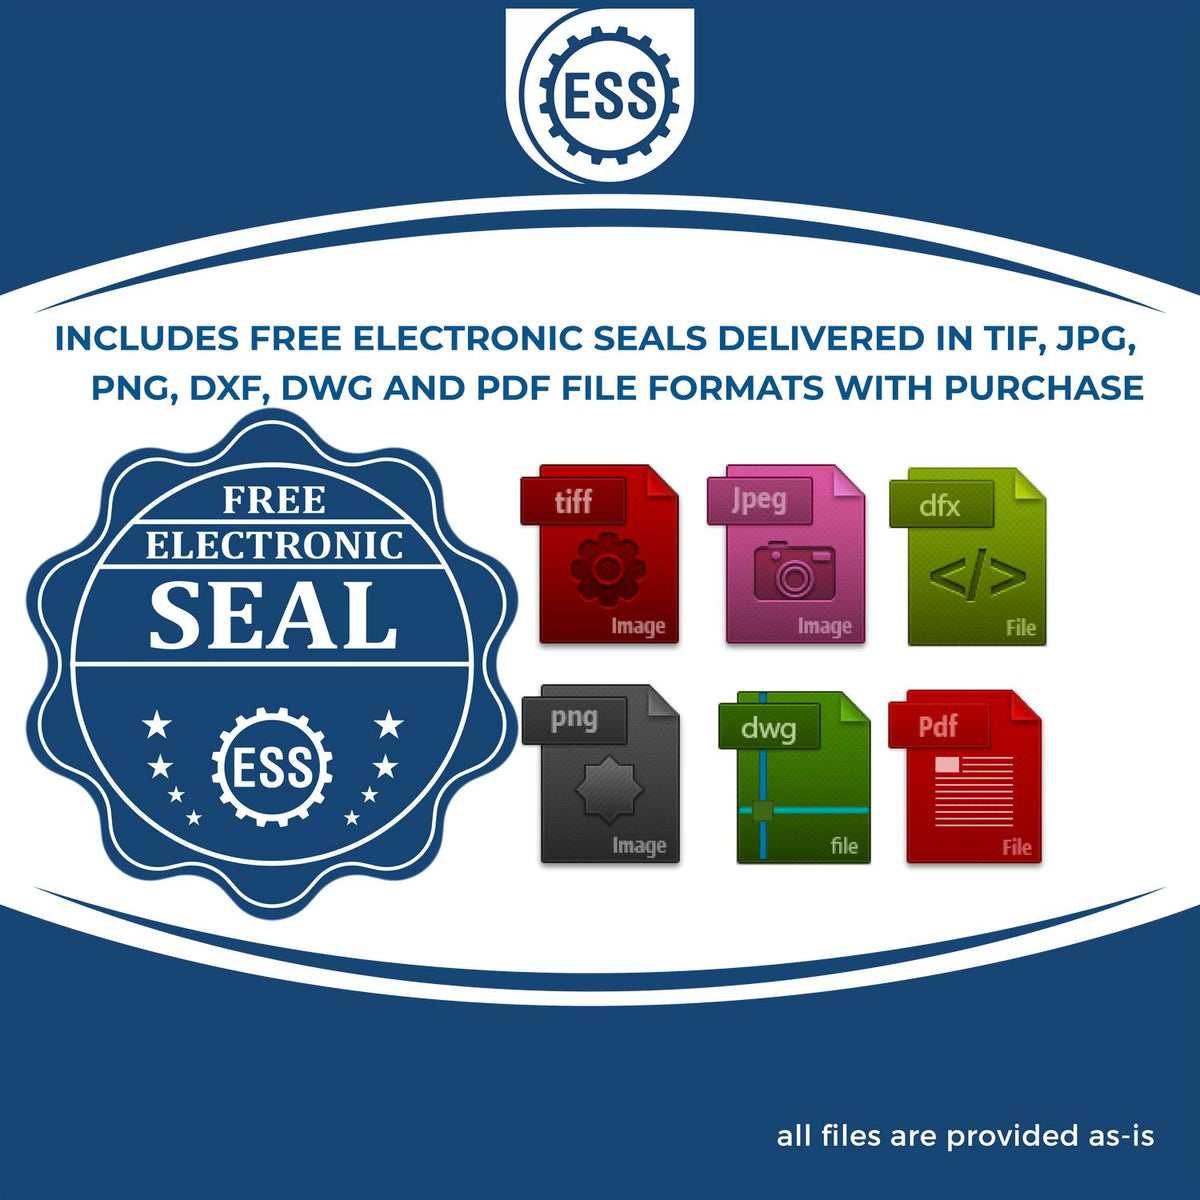 An infographic for the free electronic seal for the Slim Pre-Inked Nebraska Land Surveyor Seal Stamp illustrating the different file type icons such as DXF, DWG, TIF, JPG and PNG.